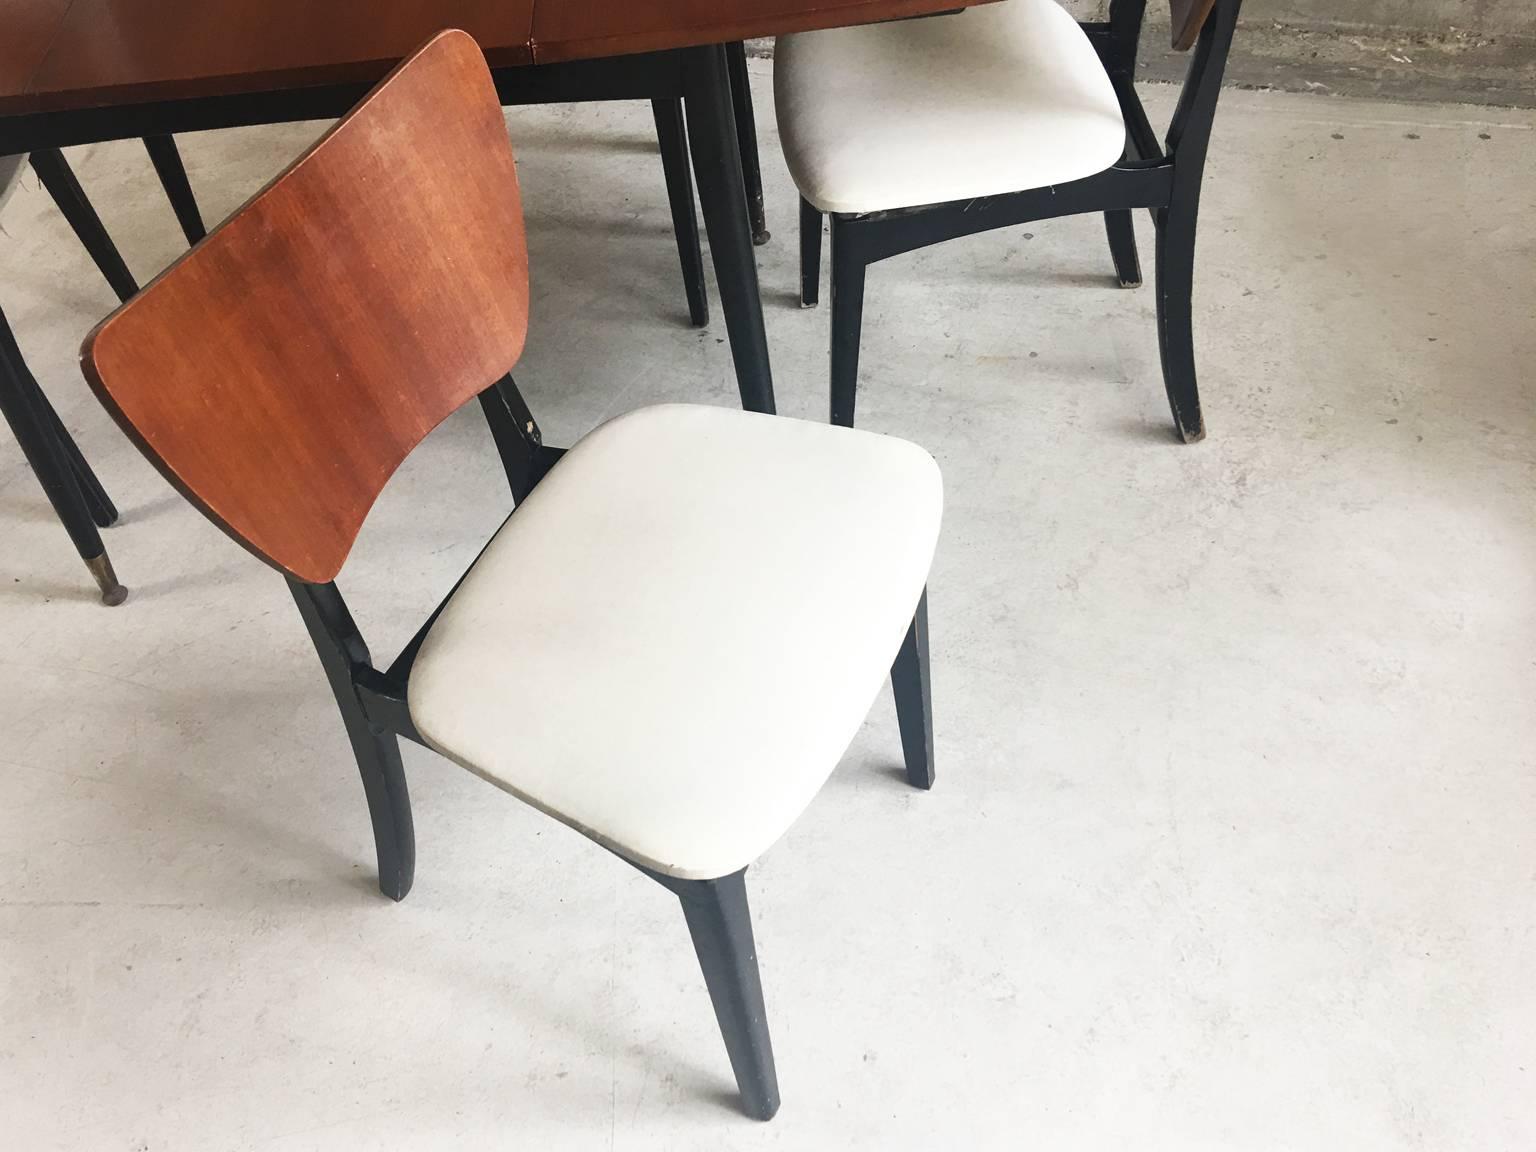 A gloss lacquered teak extendable table with black painted wooden frame. The chairs have matching teak backrests and white vinyl seats. The table has a central least that can be removed. The table has brass plated feet although these are quite